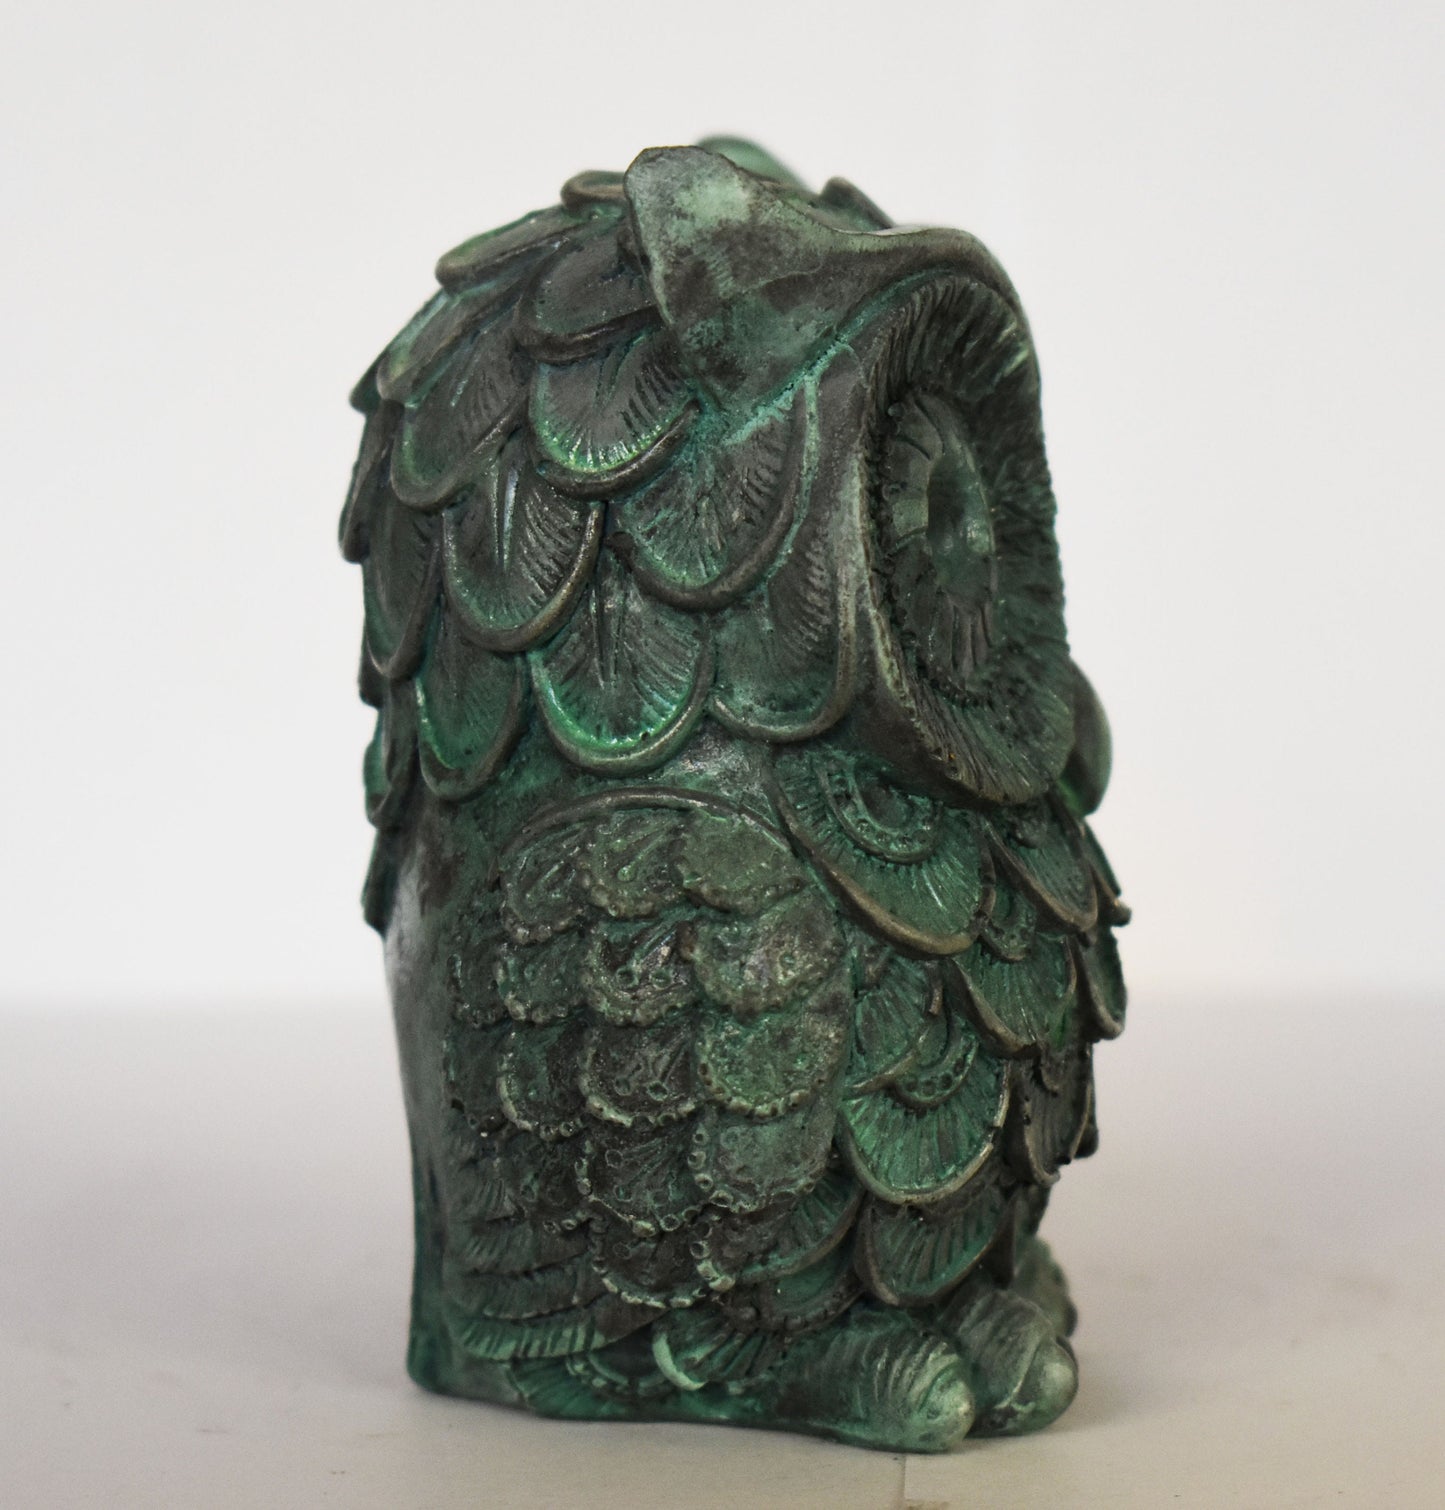 Owl of Goddess Athena - represent the literal wisdom and knowledge of Athena in her role as a goddess of wisdom - Casting Stone Statue